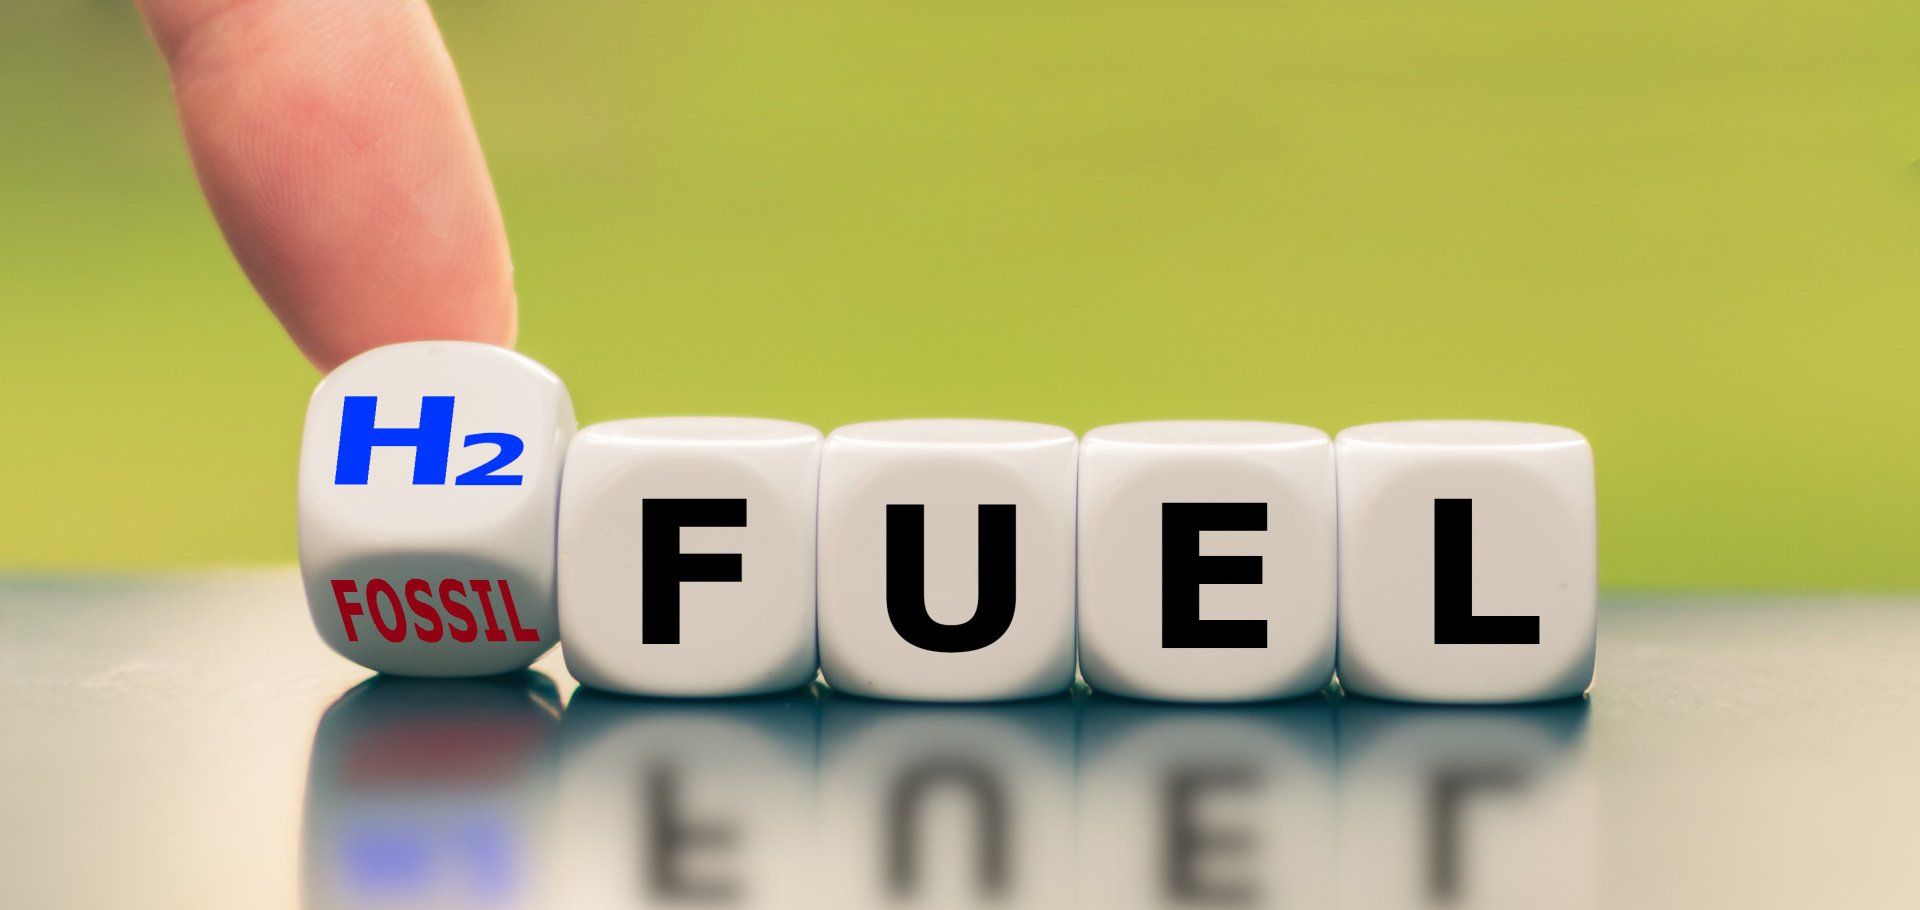 letter dice spelling FUEL with H2 fuel being changed into fossil